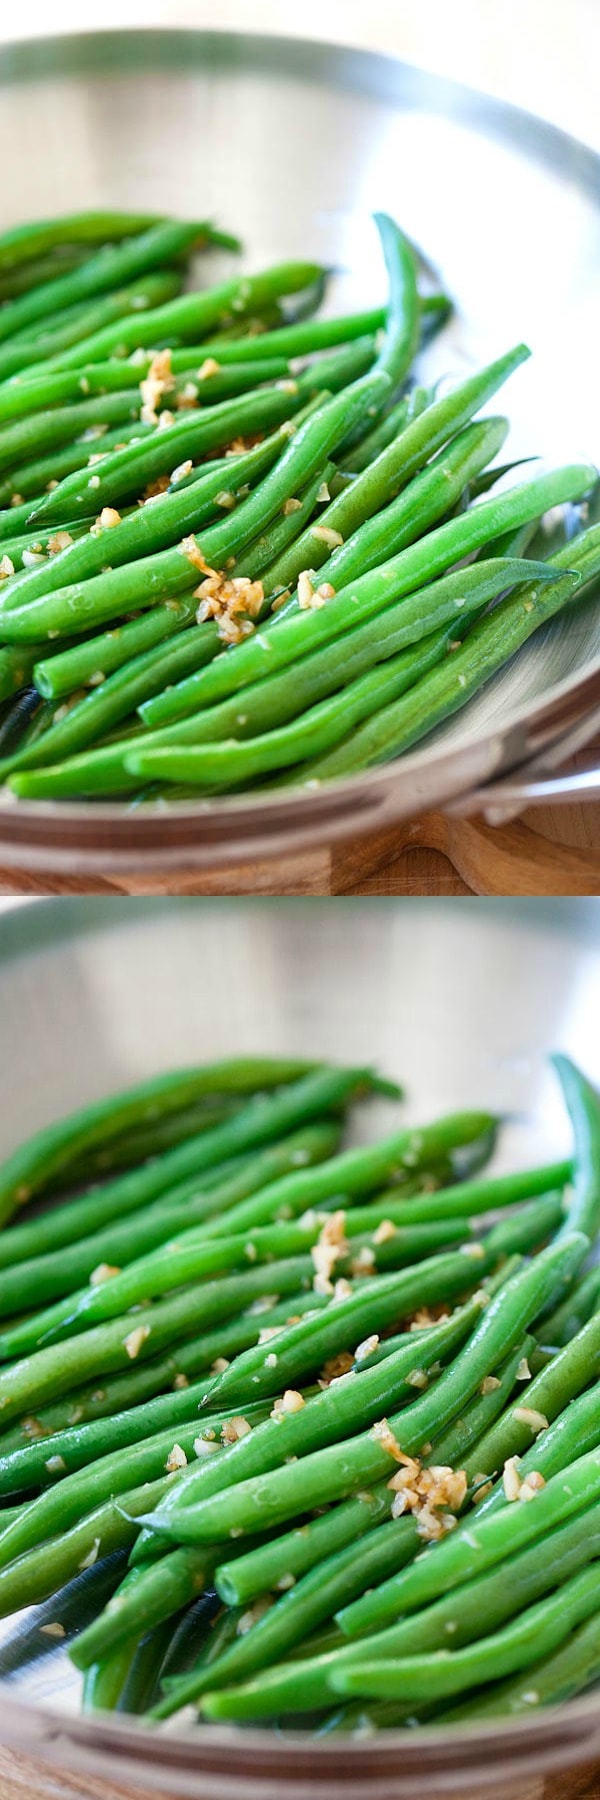 Garlic Green Beans - 10-min stir-fry green beans recipe with garlic. Super healthy, easy and budget-friendly for the entire family.| rasamalaysia.com